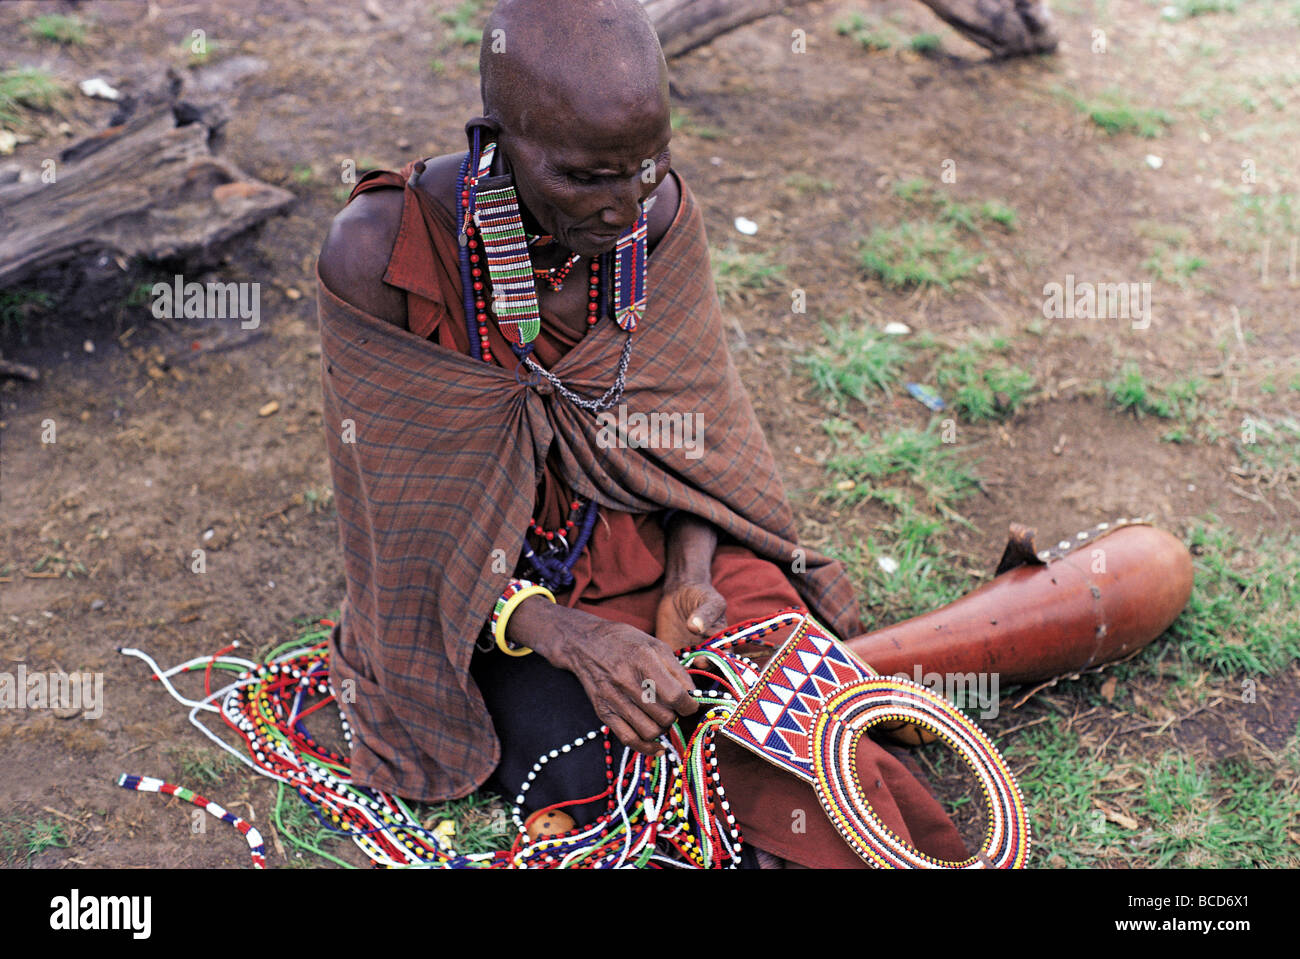 Maasai married woman with shaved head making traditional bead necklace Masai Mara National Reserve Kenya East Africa Stock Photo